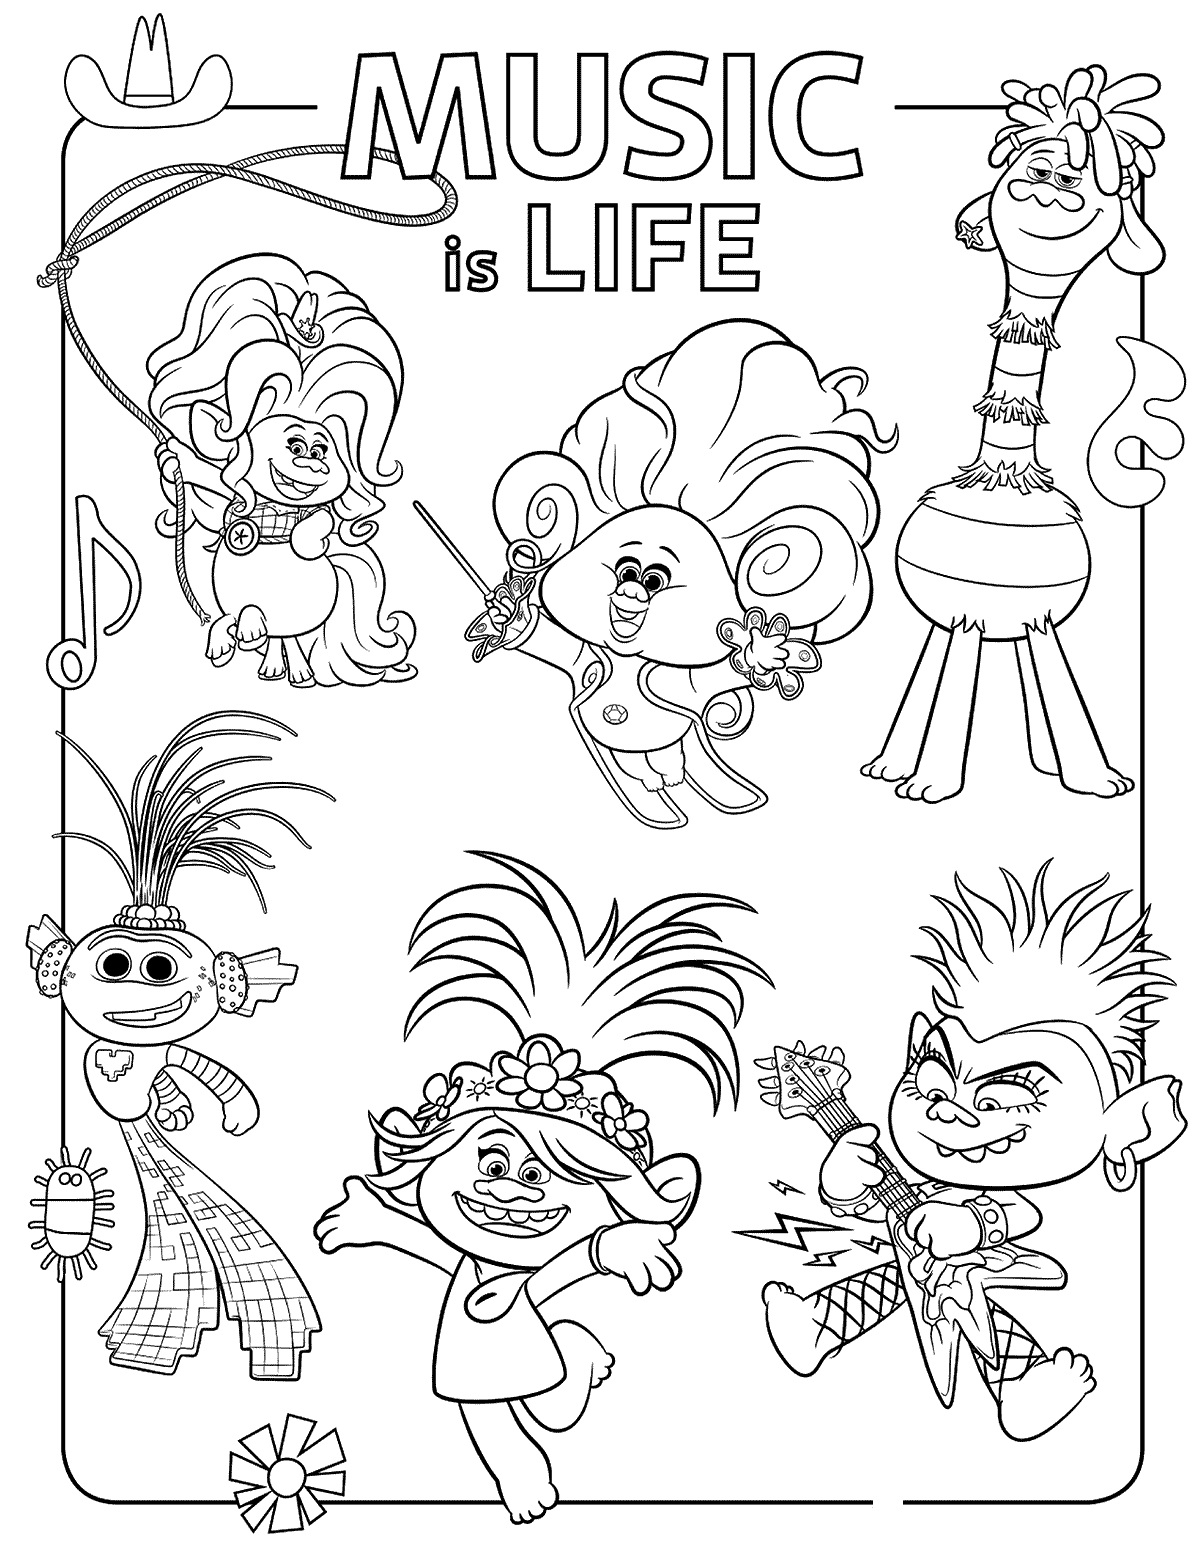 trolls-world-tour-coloring-pages-print-for-free-new-trolls